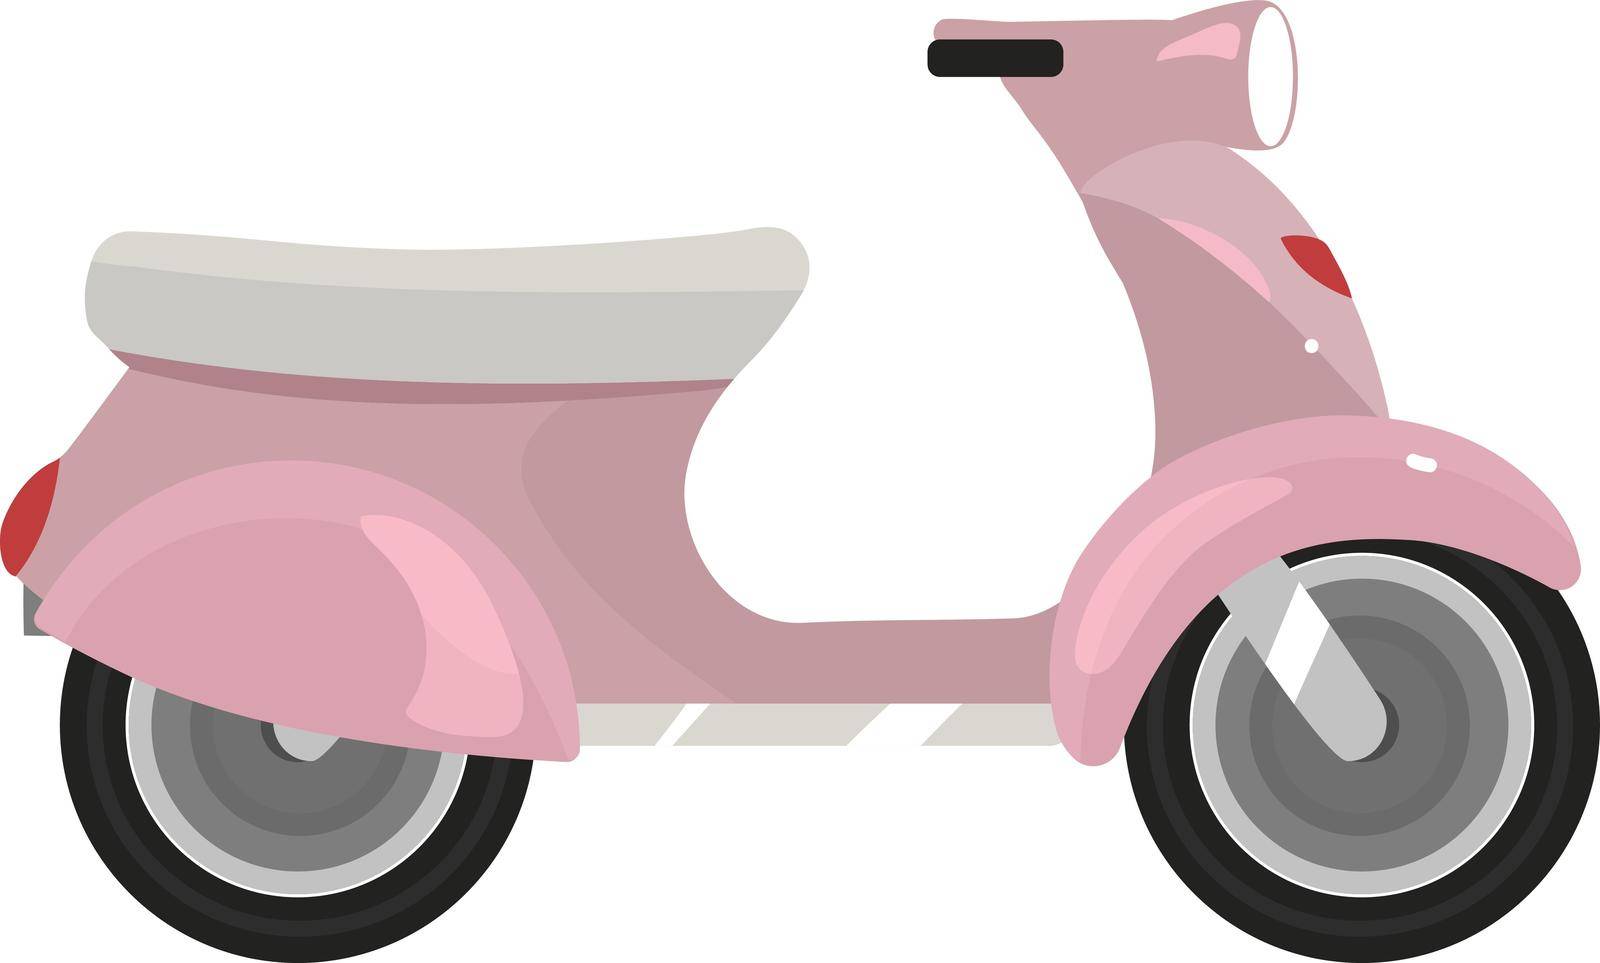 Scooter flat color vector object. Urban transportation option. Moped. Motorized individual transport. Low-speed motorcycle isolated cartoon illustration for web graphic design and animation